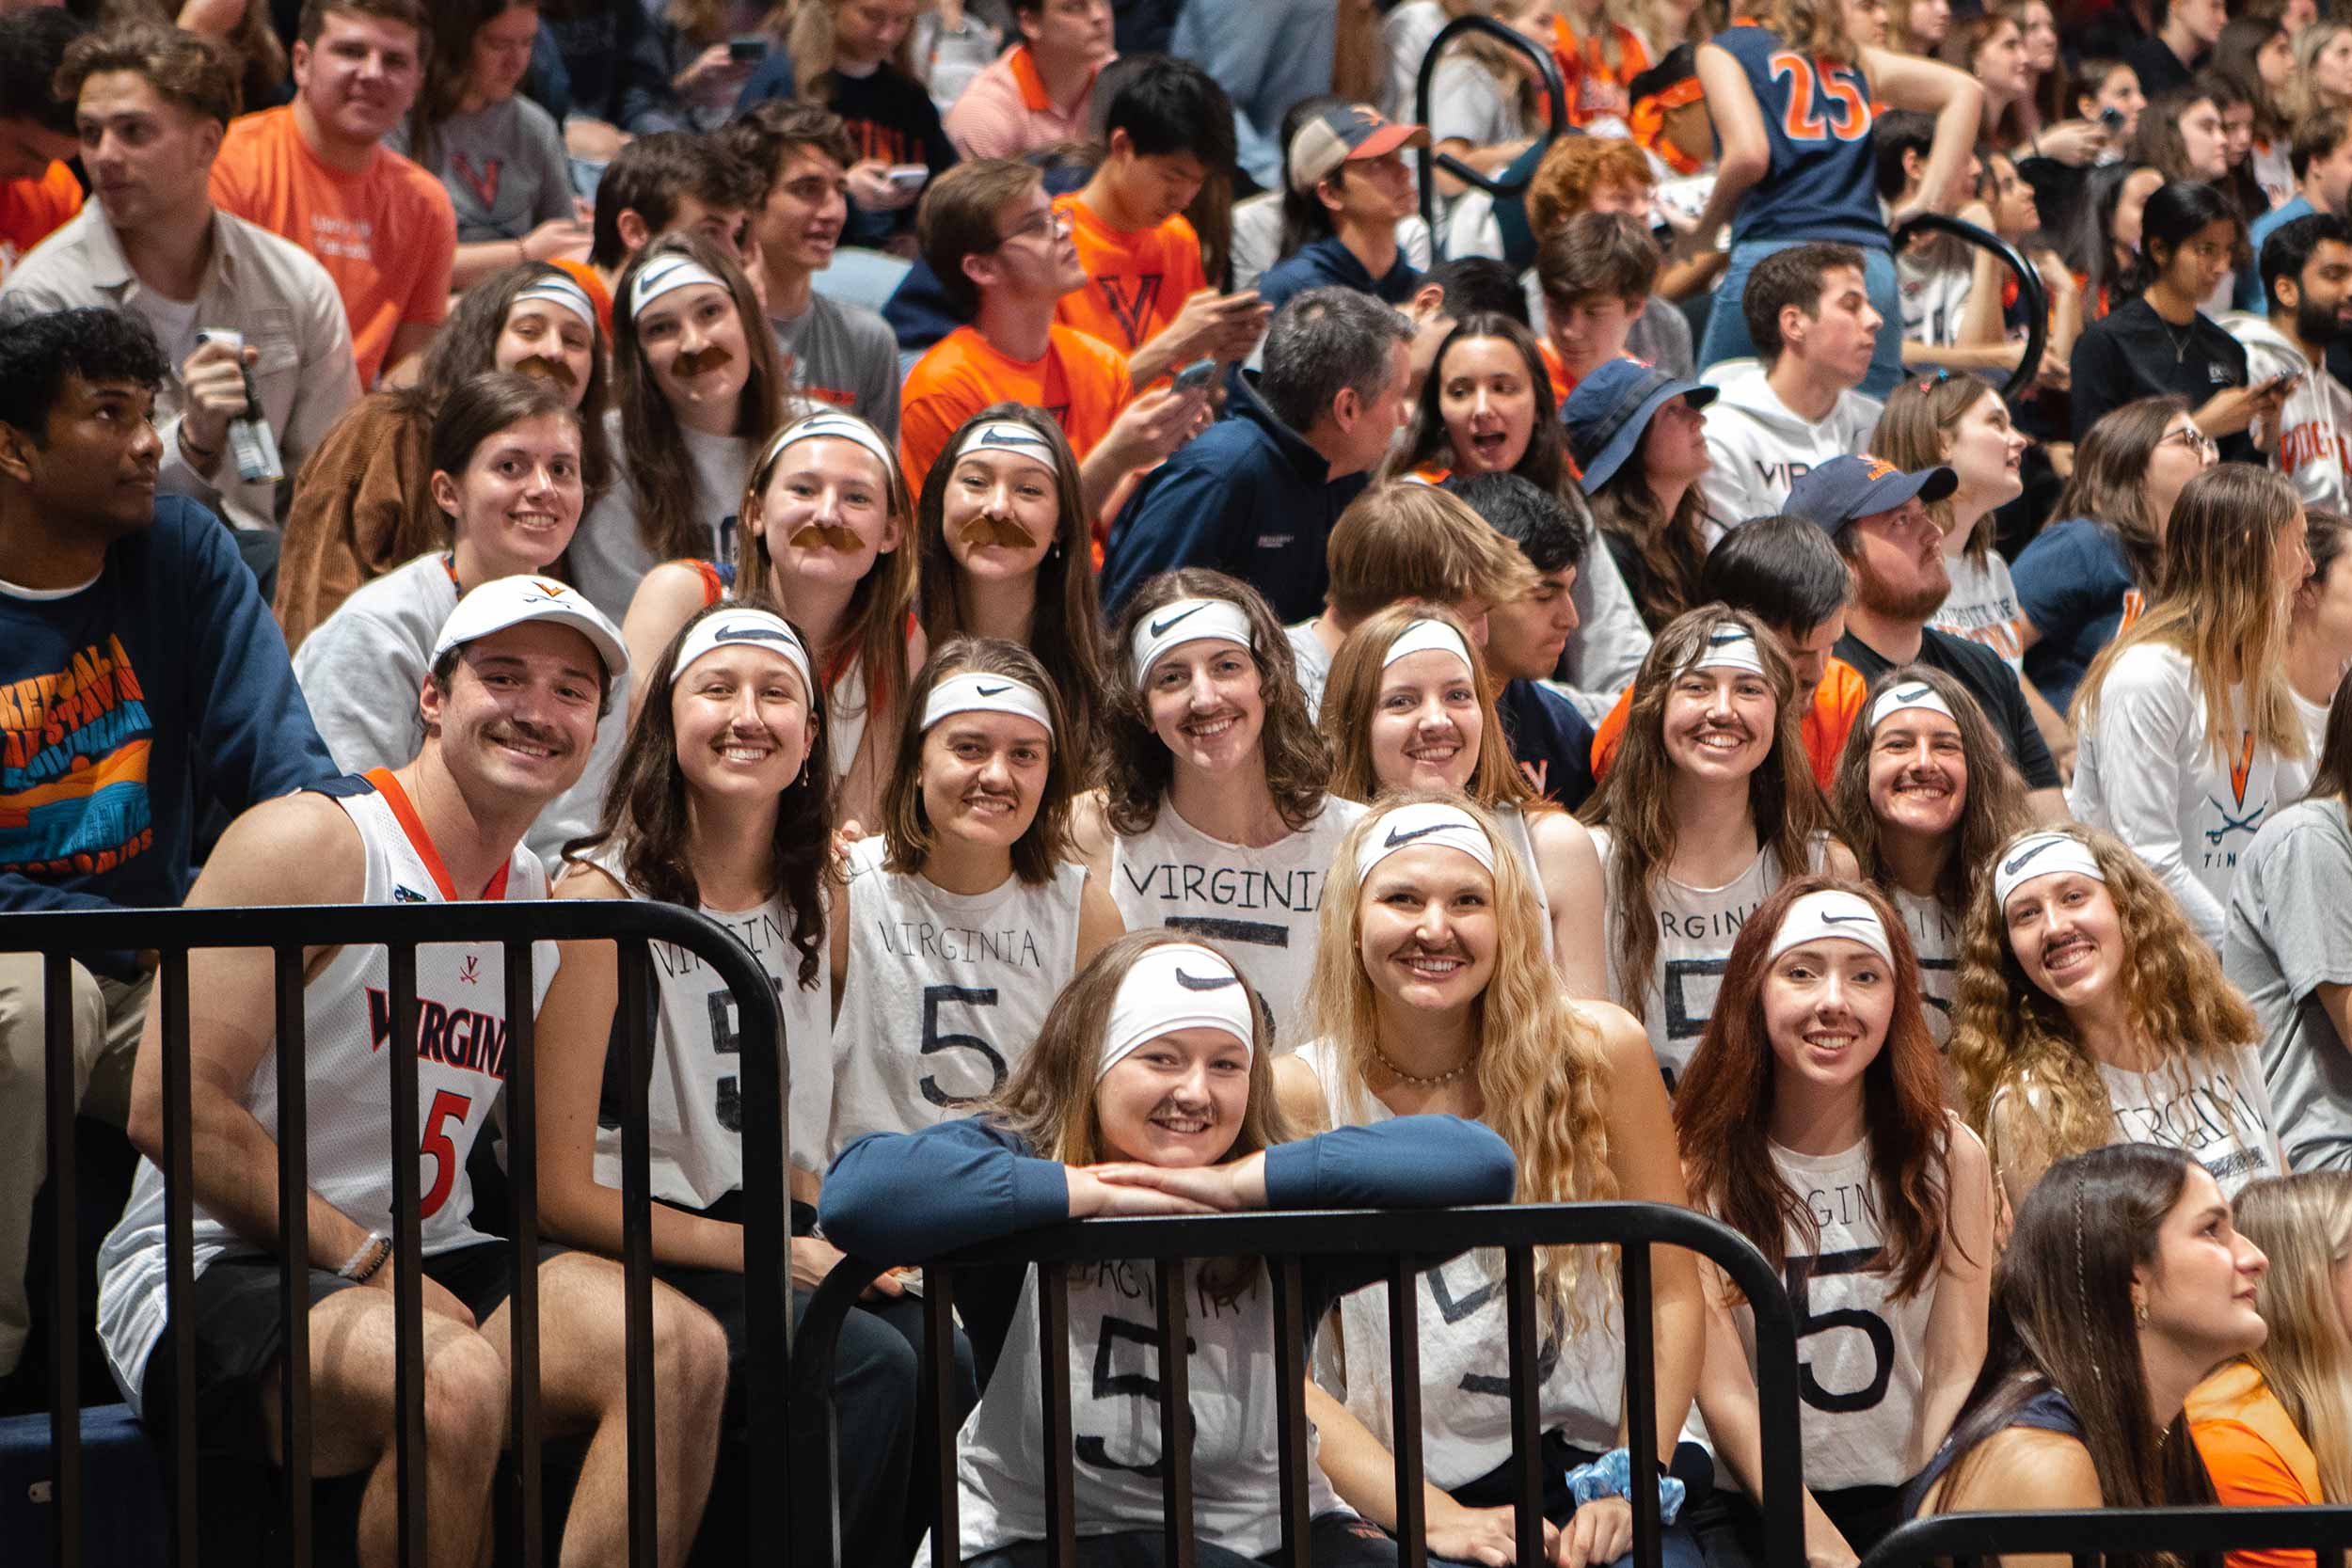 A group of students wearing fake mustaches and white sleeveless teeshirts with the number 5 written on it at a UVA Men's Basketball home game